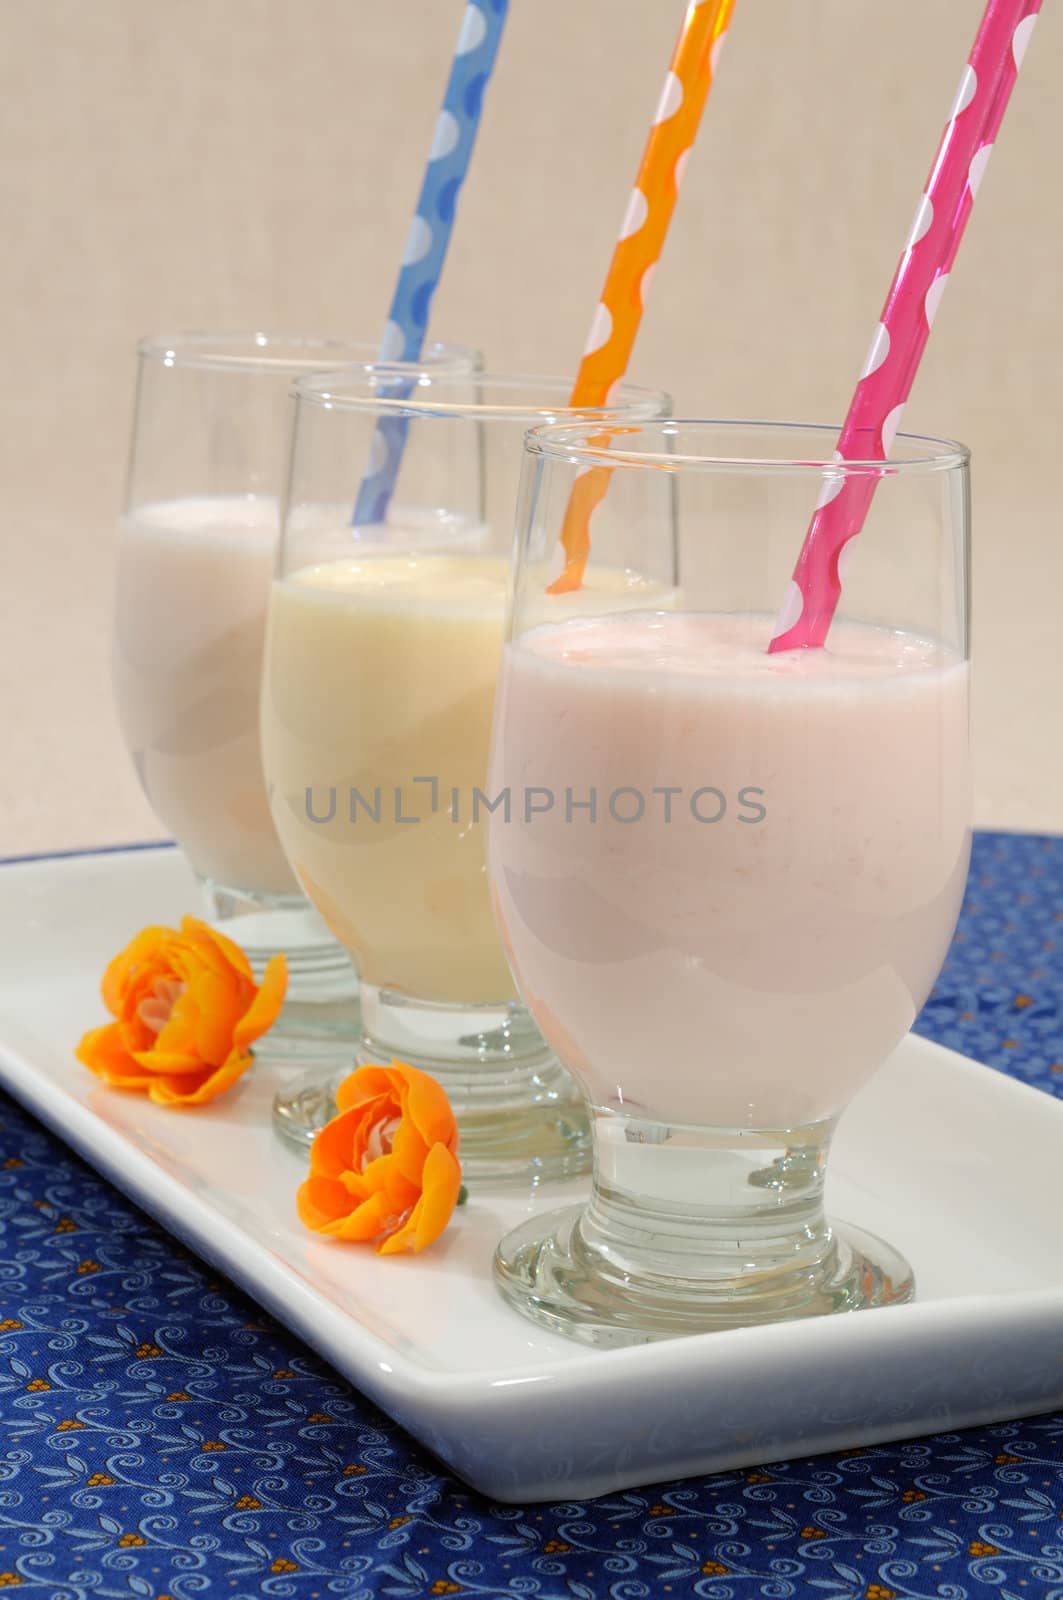 Fruit-flavored smoothies with colored drinking straws